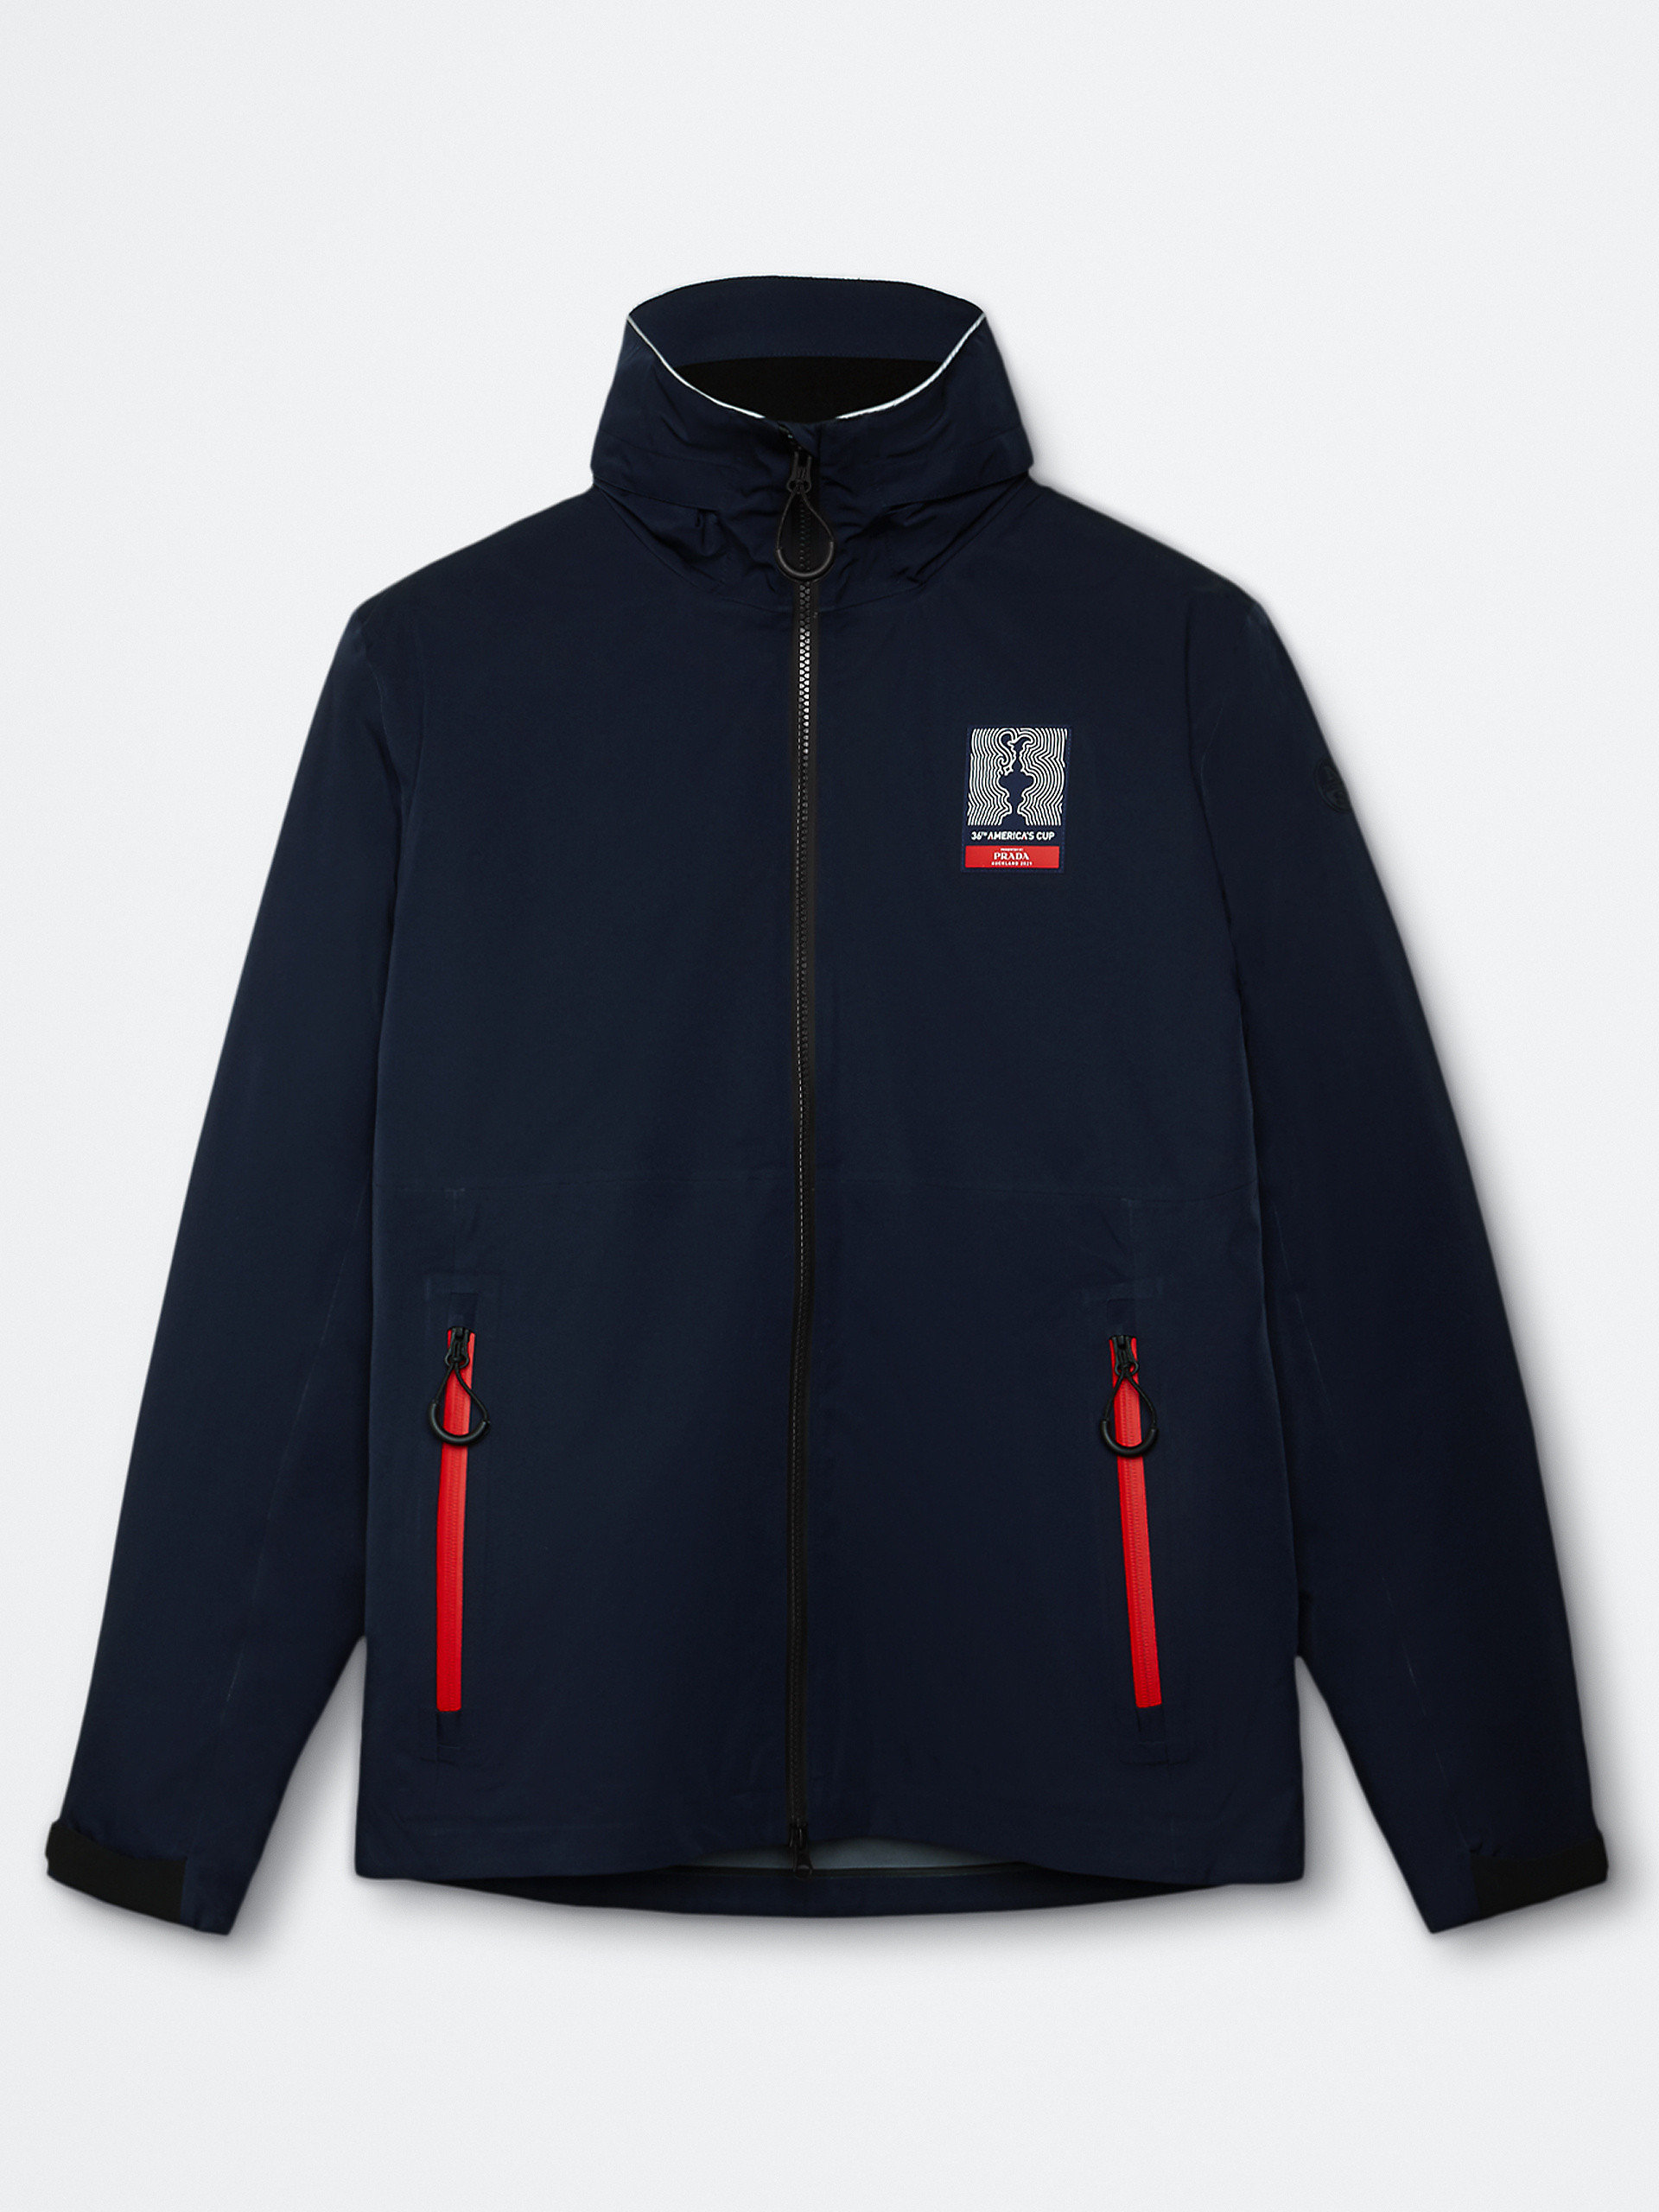 Auckland Jacket | Jackets | North Sails Collection